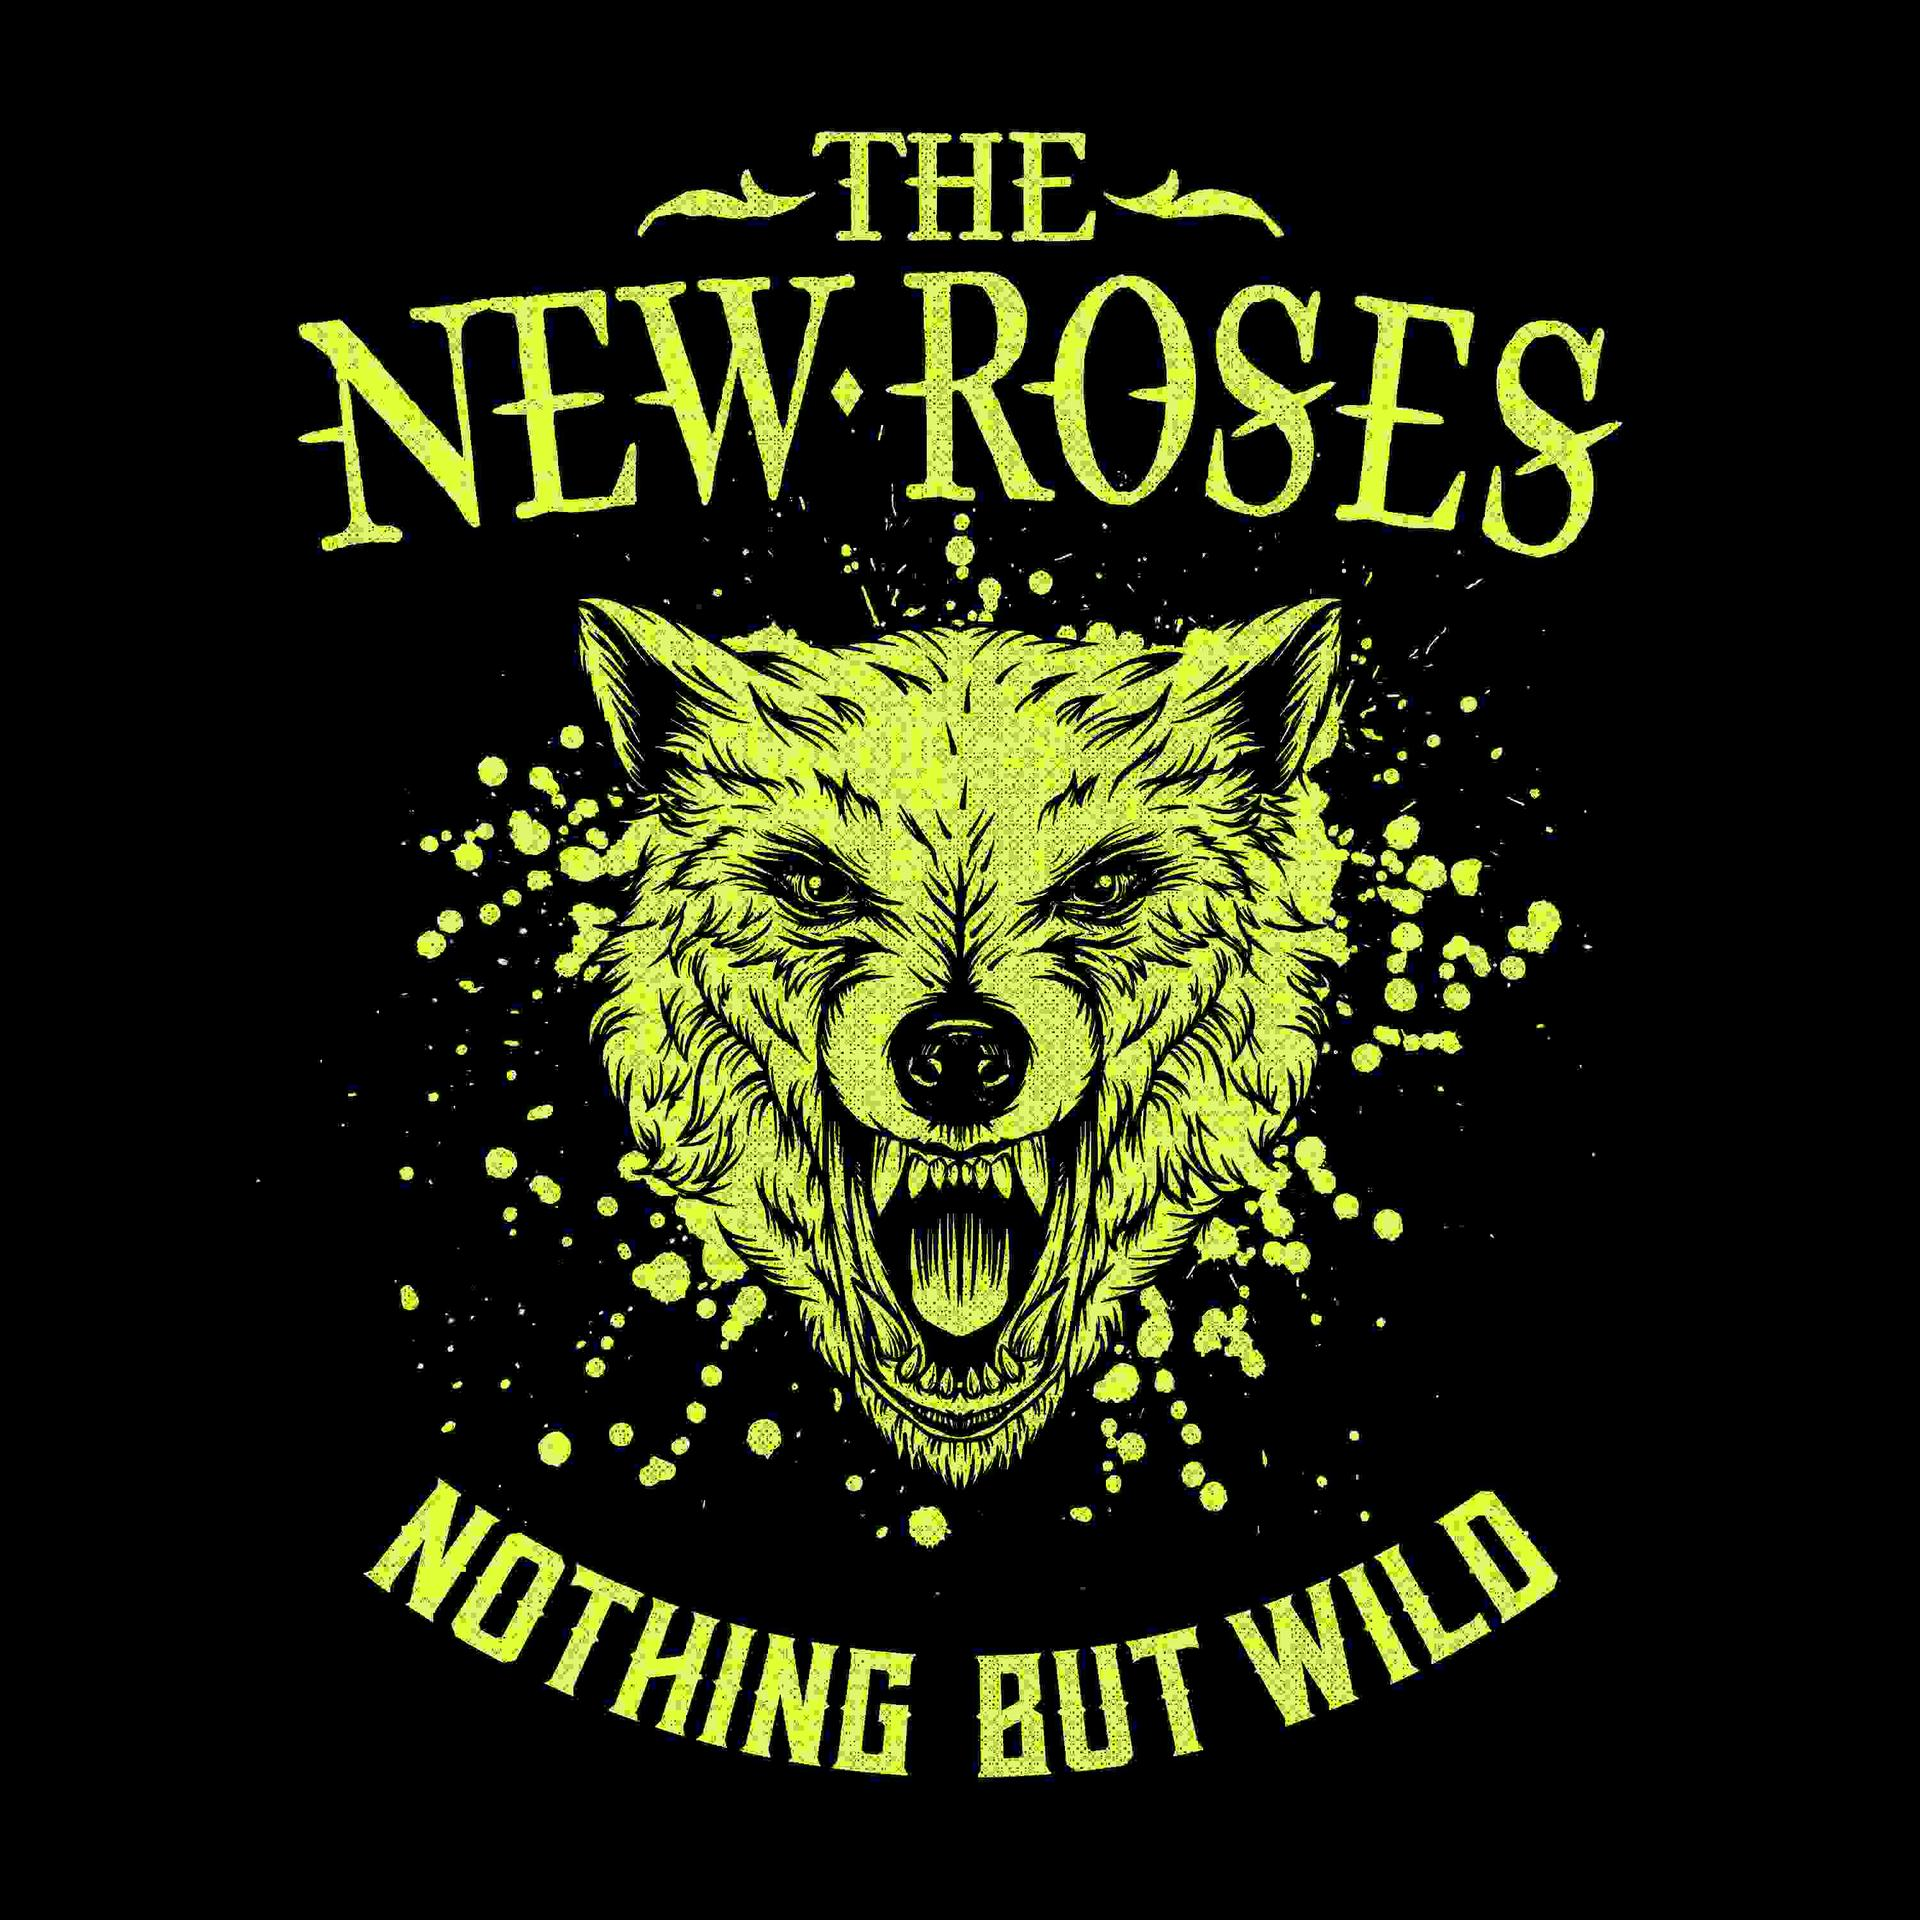 The New Roses - Nothing - (CD) but wild